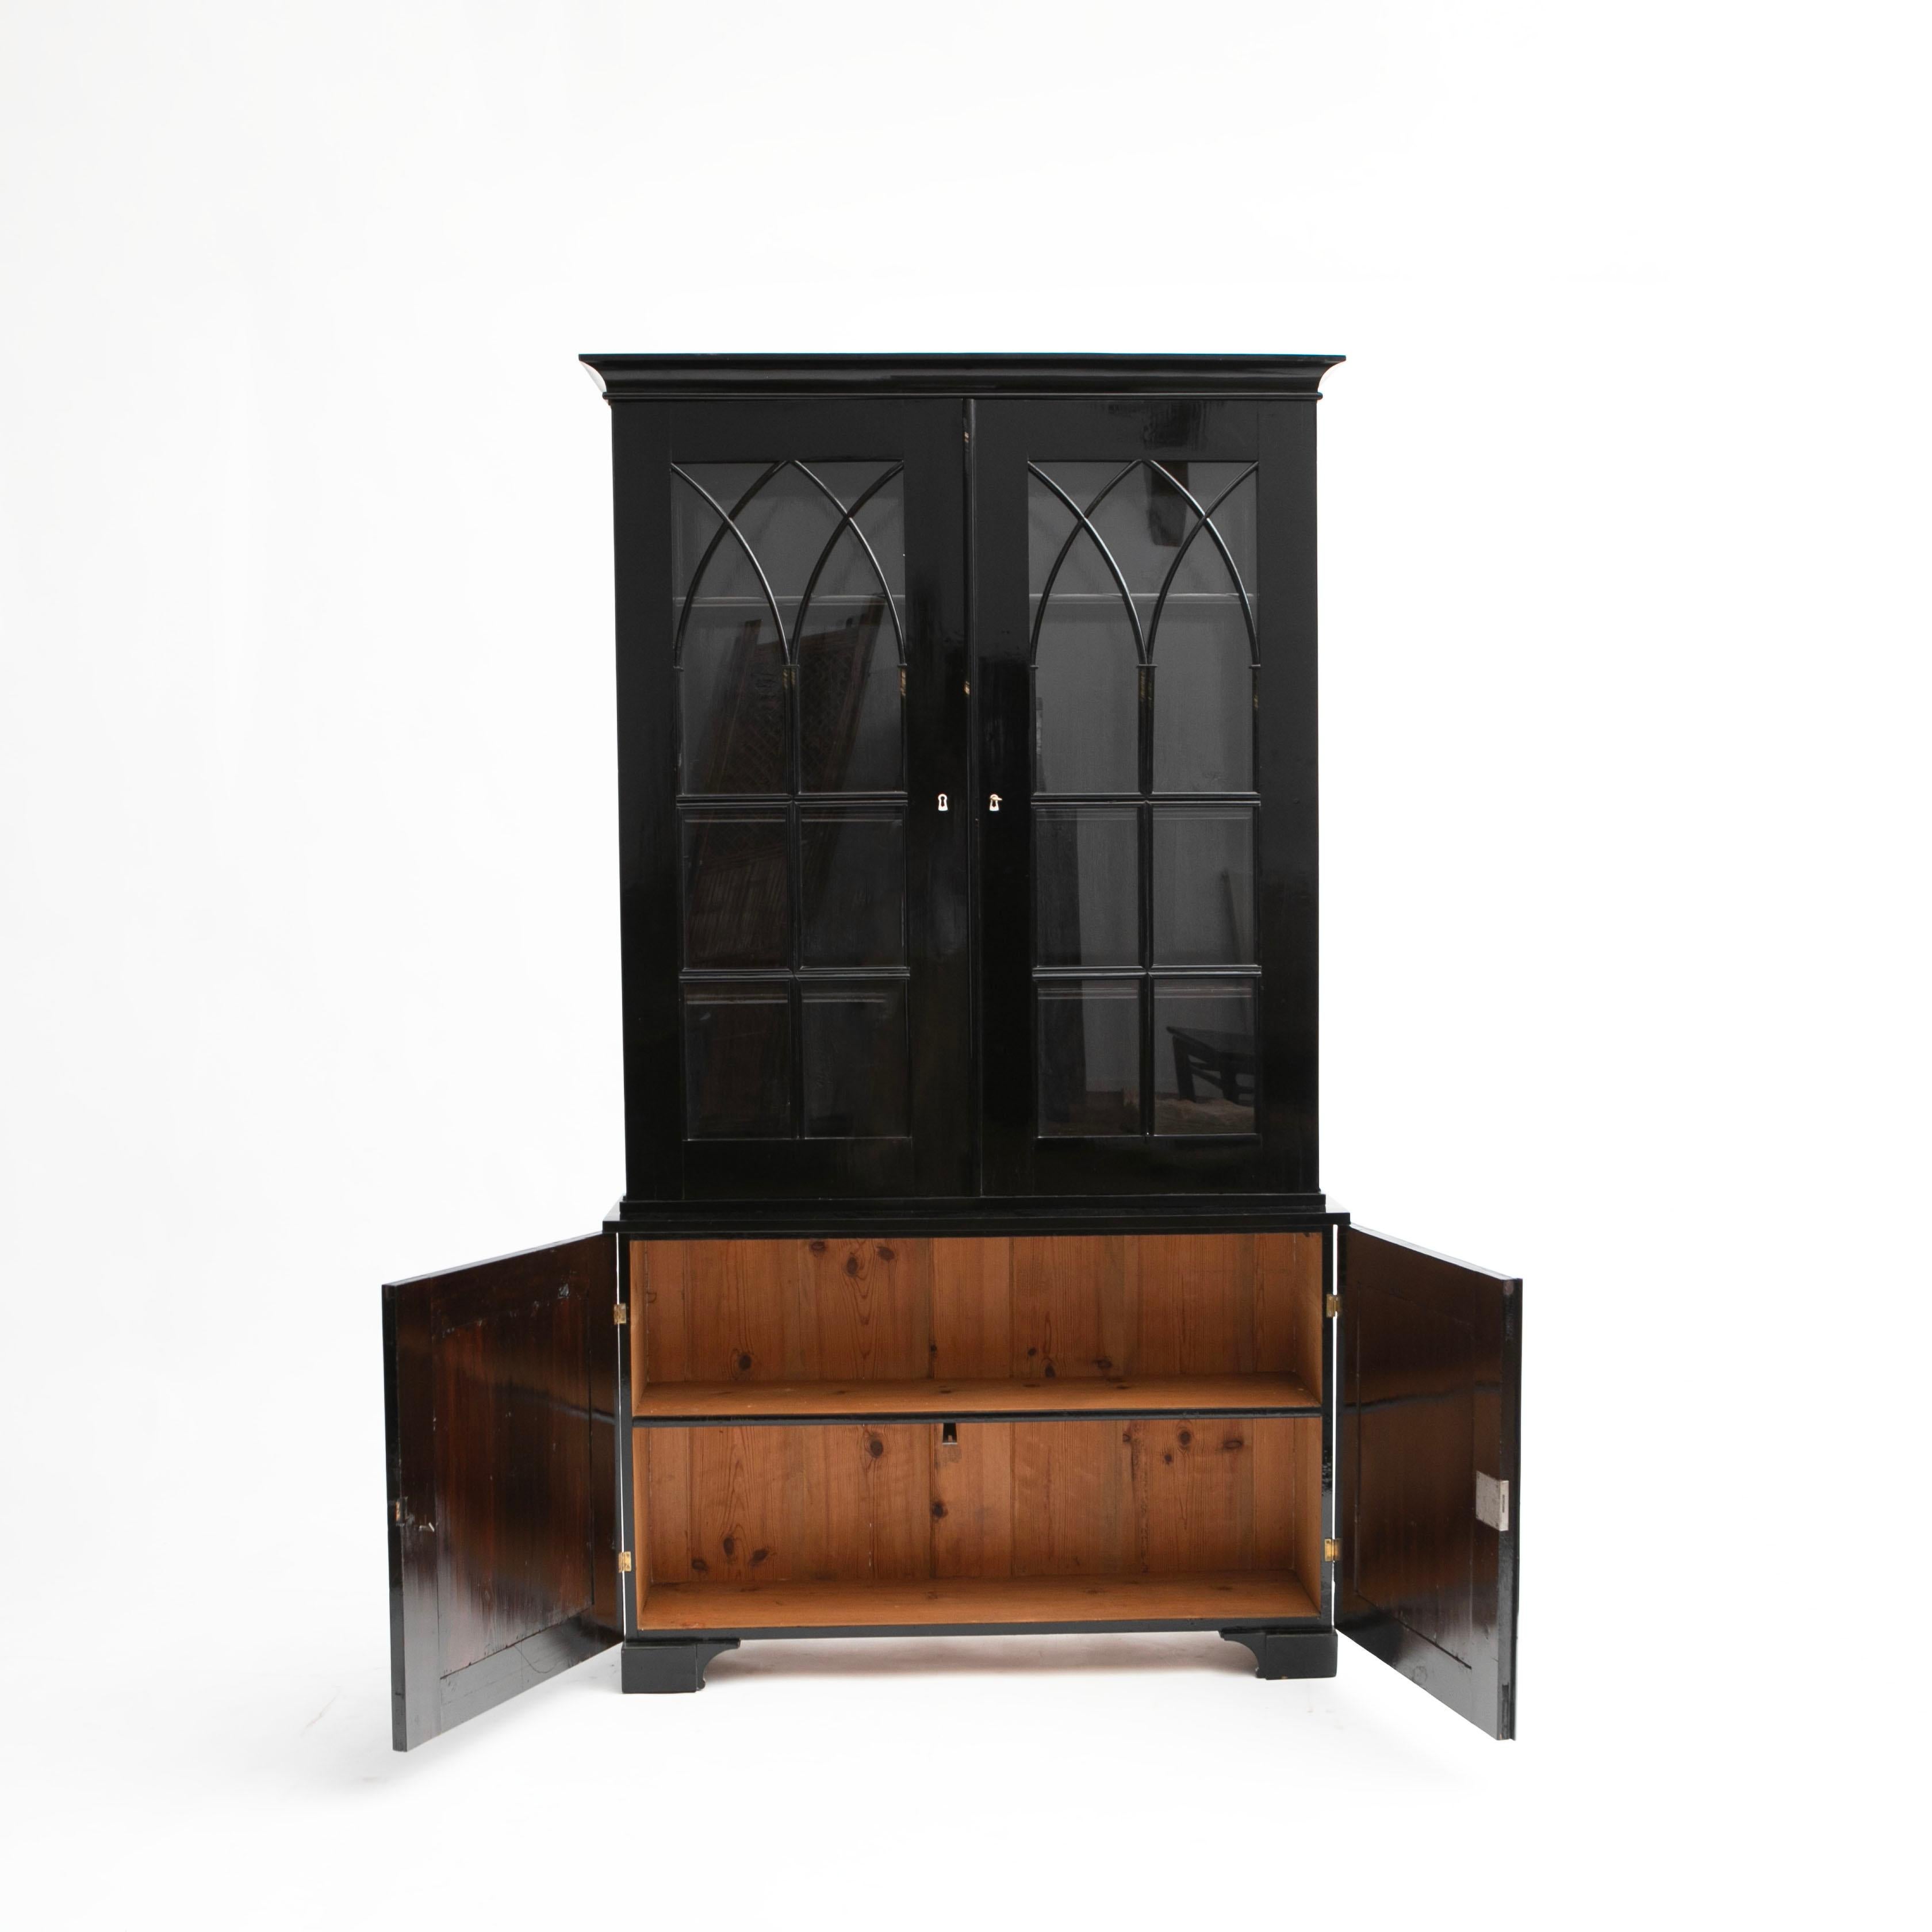 Polished Antique Swedish Late Empire Black-polished Birch Bookcase For Sale